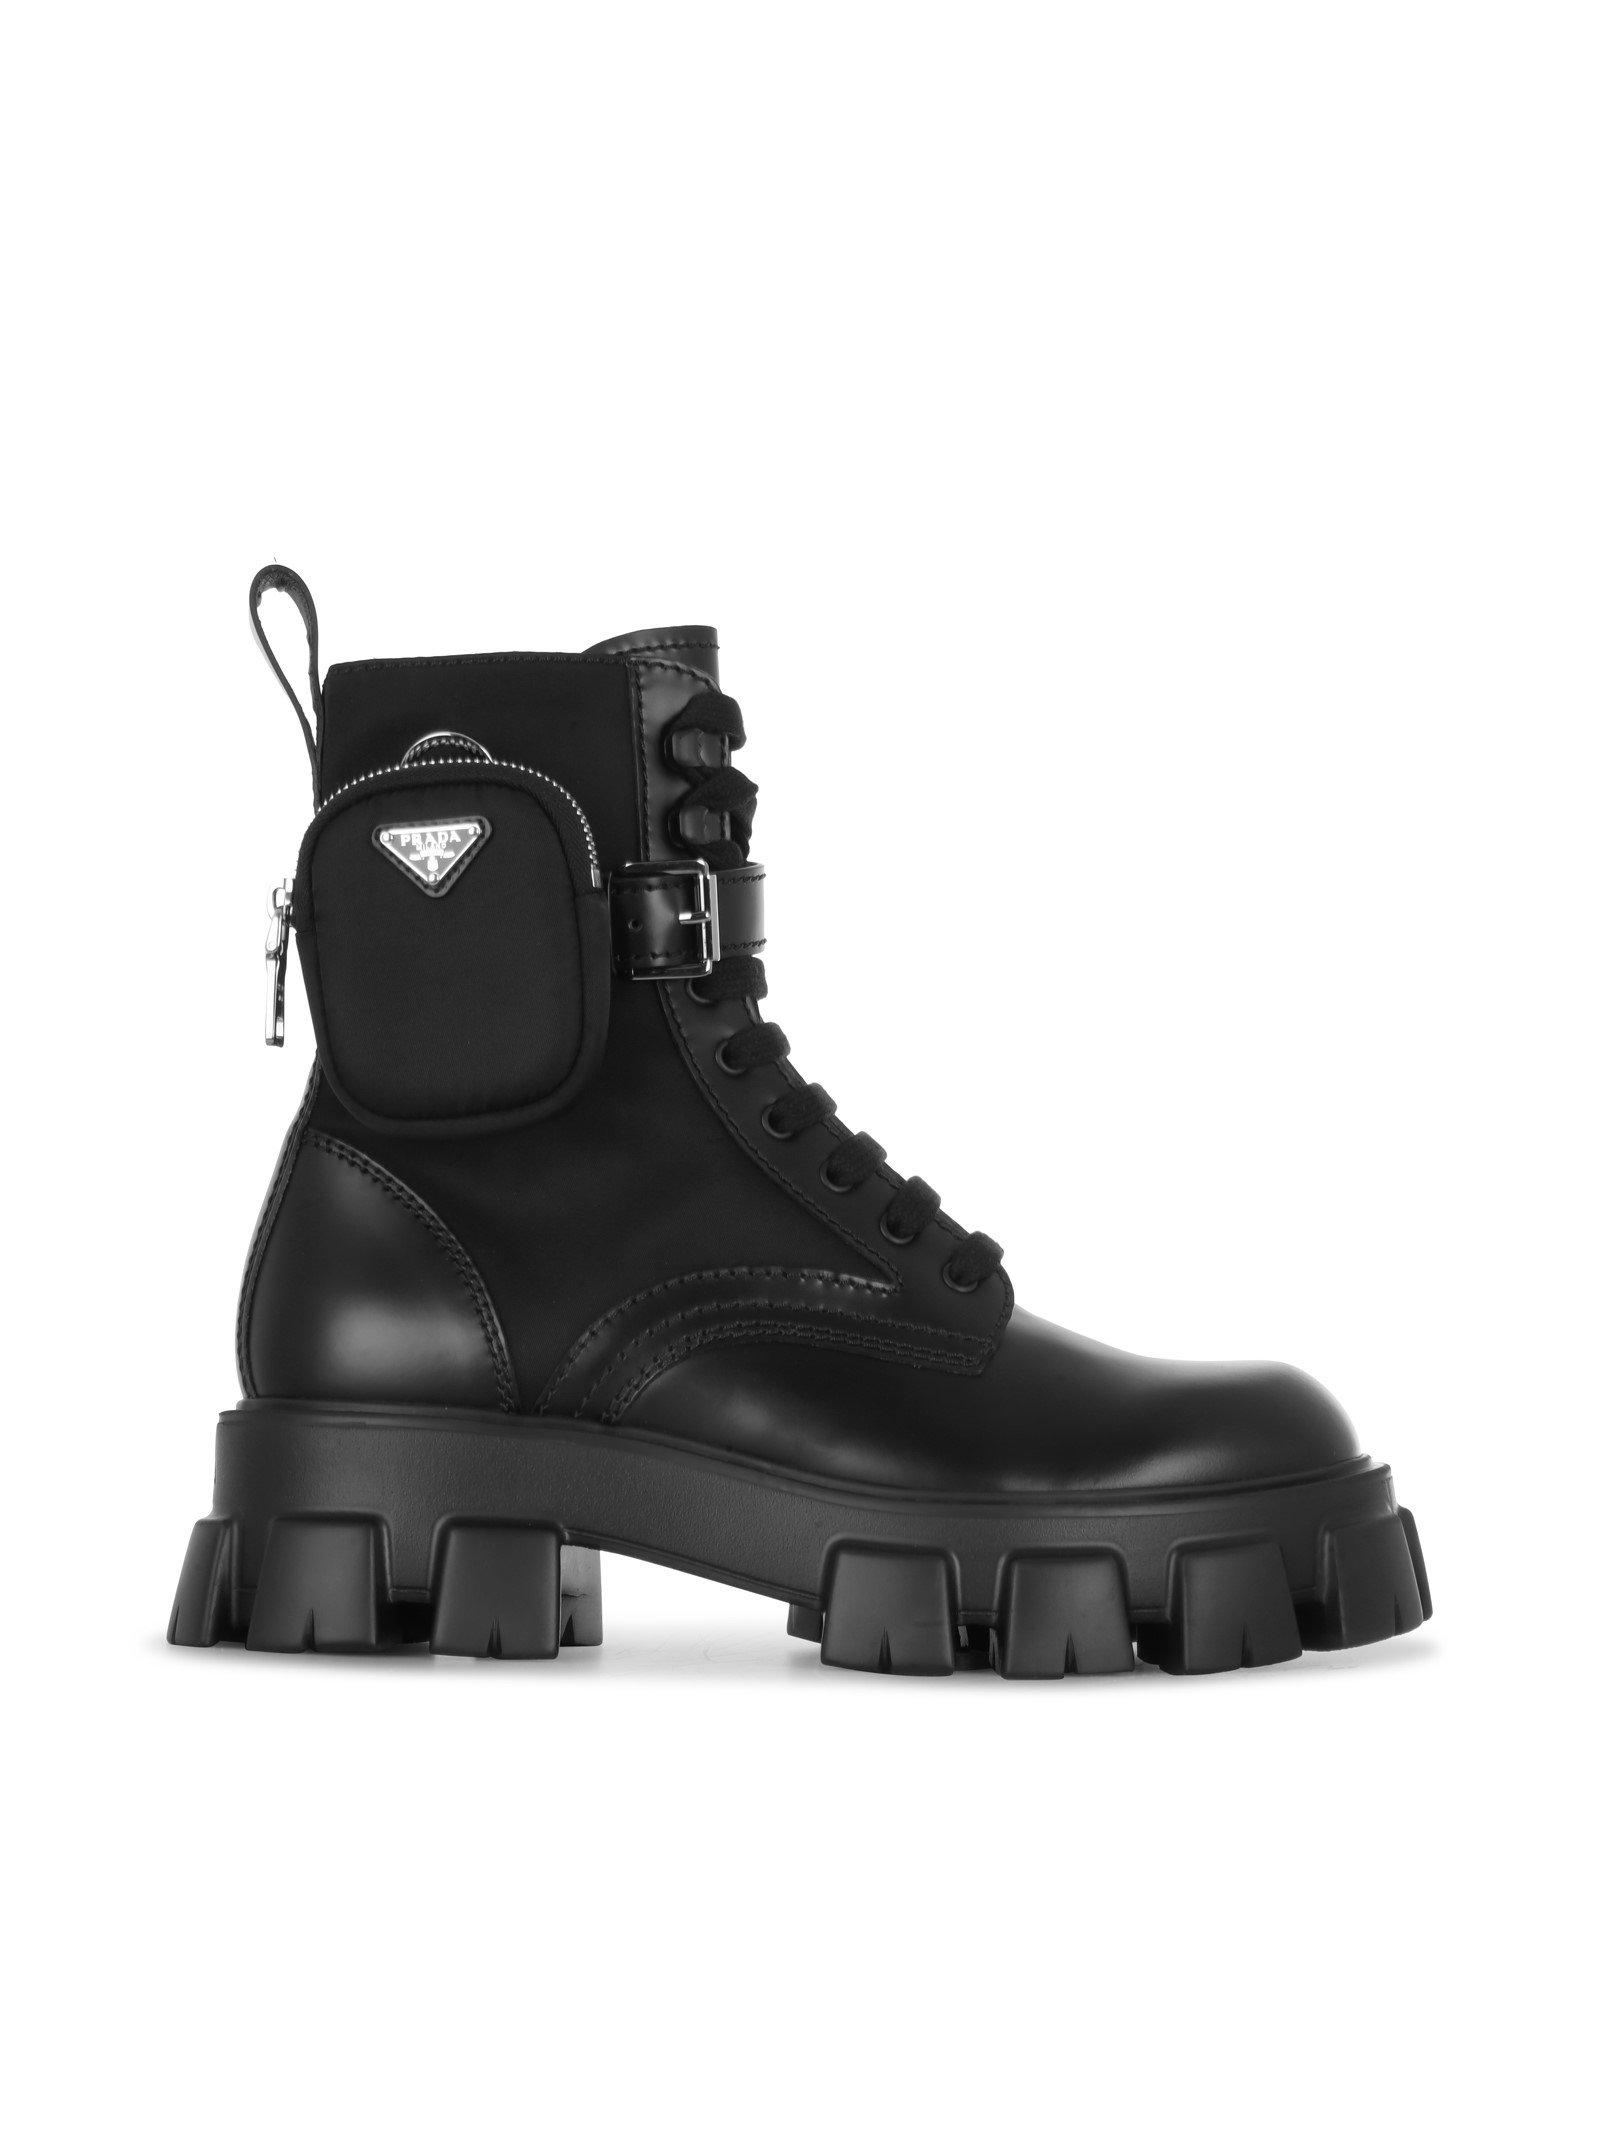 Prada Ankle Pouch Combat Boots in Black for Men - Lyst